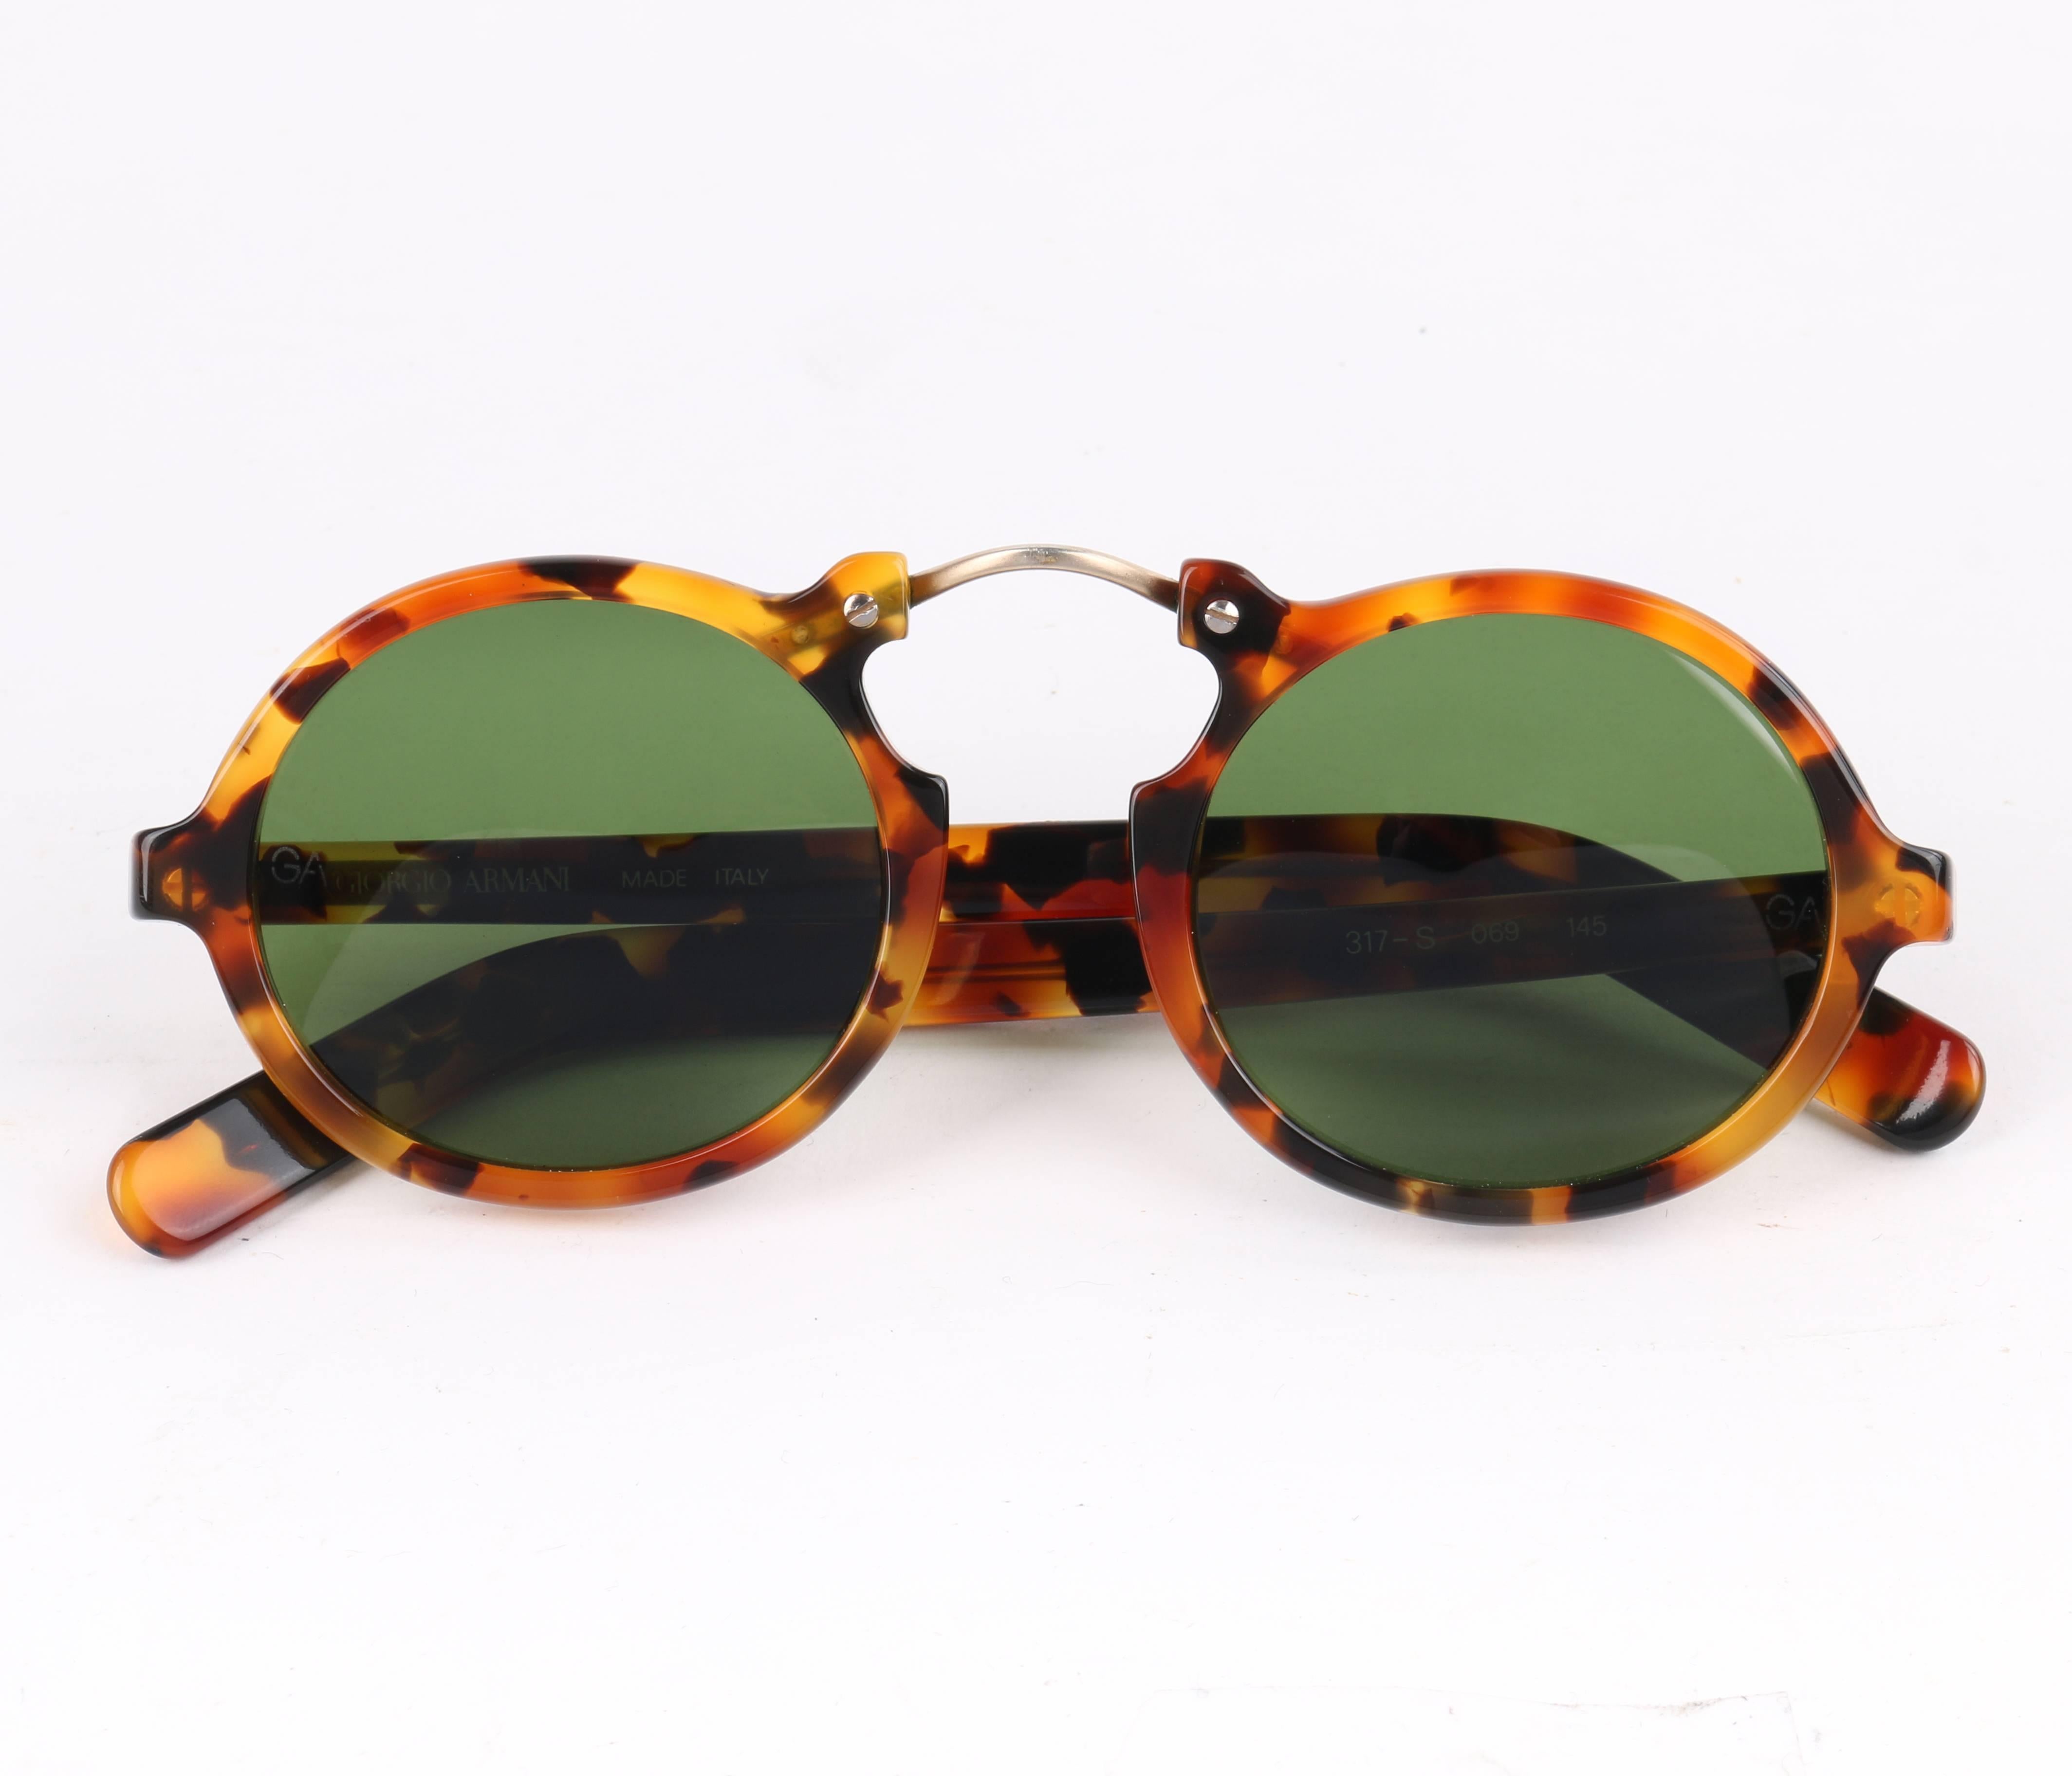 Rare Vintage Giorgio Armani c.1990's round tortoiseshell frame sunglasses. Same style as seen worn by Joel Edgerton in 'The Great Gatsby'. Caramel brown translucent tortoiseshell round plastic frames. Green tinted lenses with 